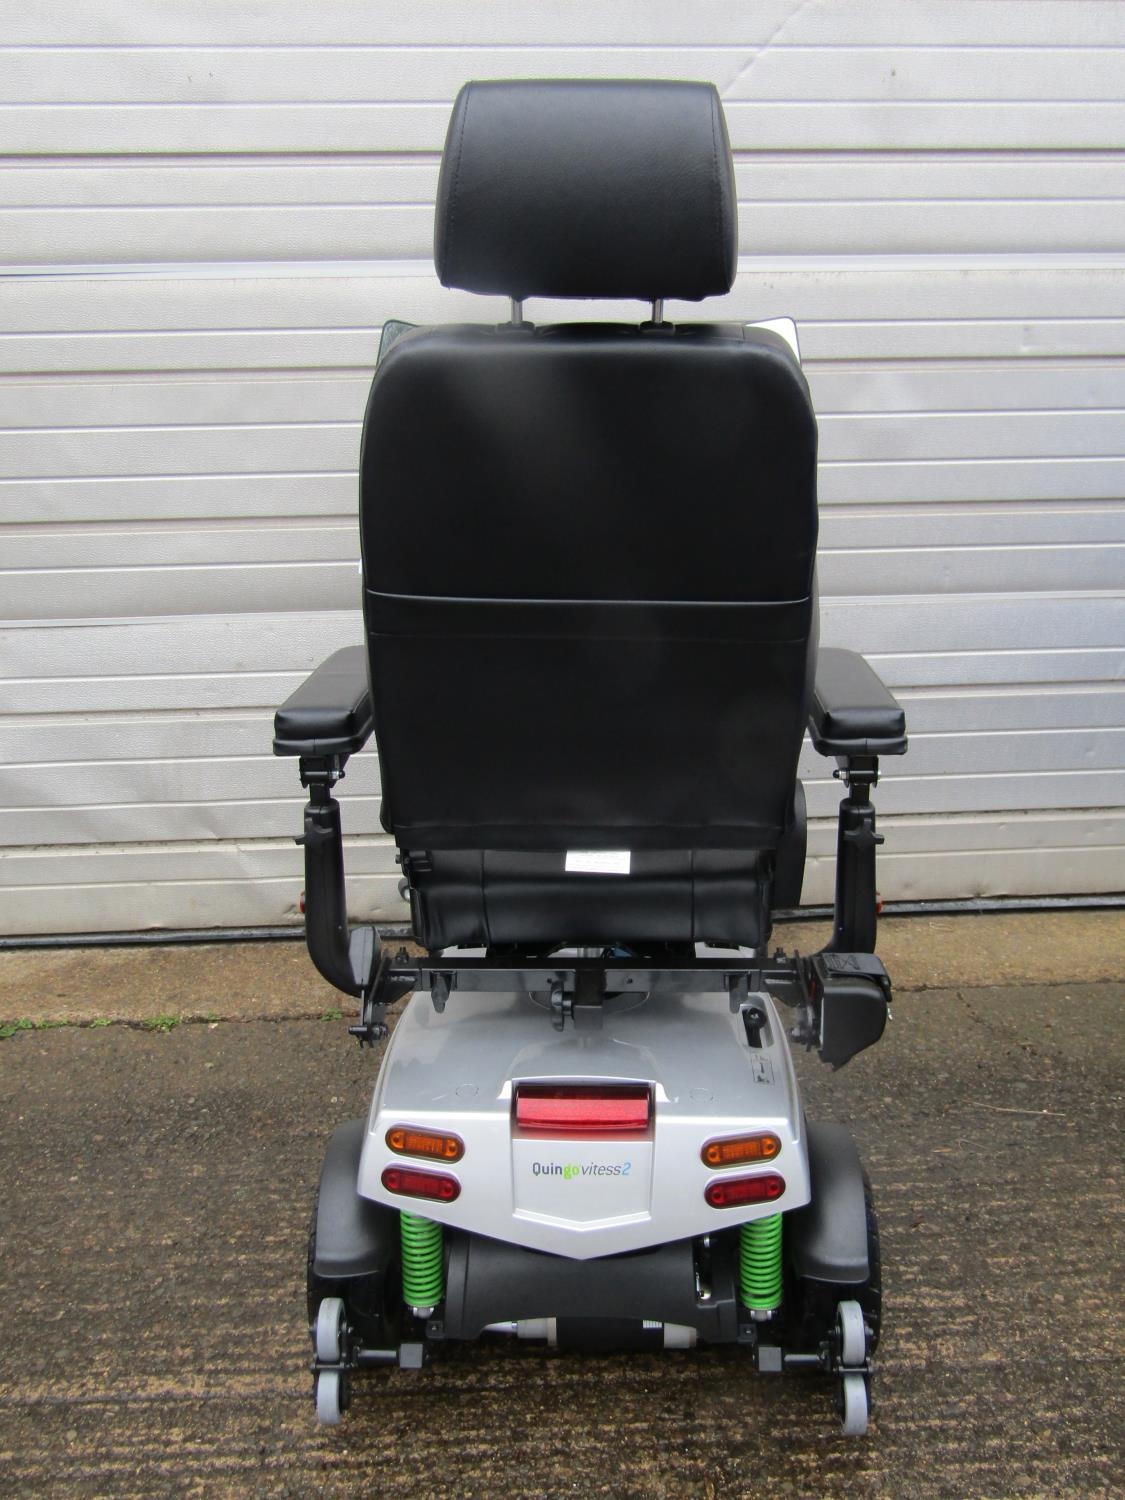 A Quingo Vitess II Mobility Scooter like new condition with only 17 hours on the clock, pair of - Image 7 of 12